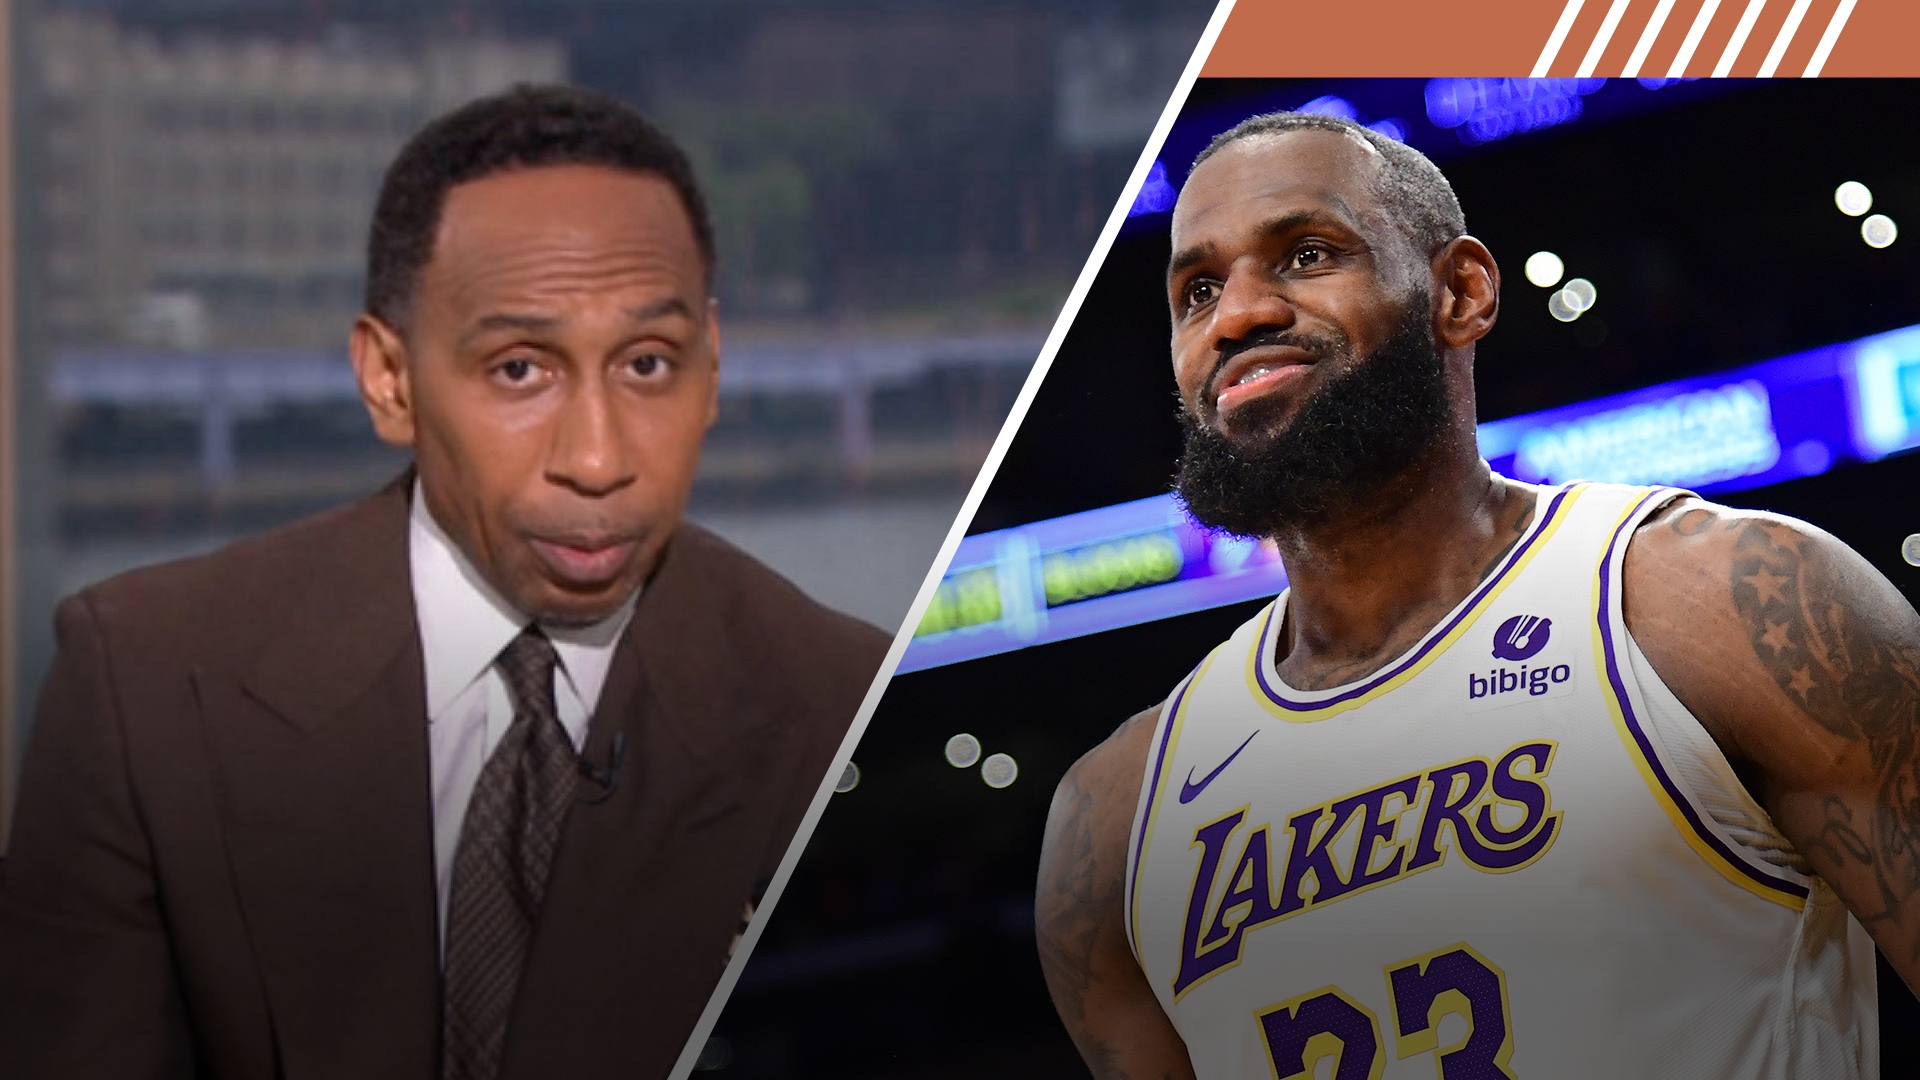 Are the Lakers or Celtics the NBA's best franchise? Stephen A. weighs in